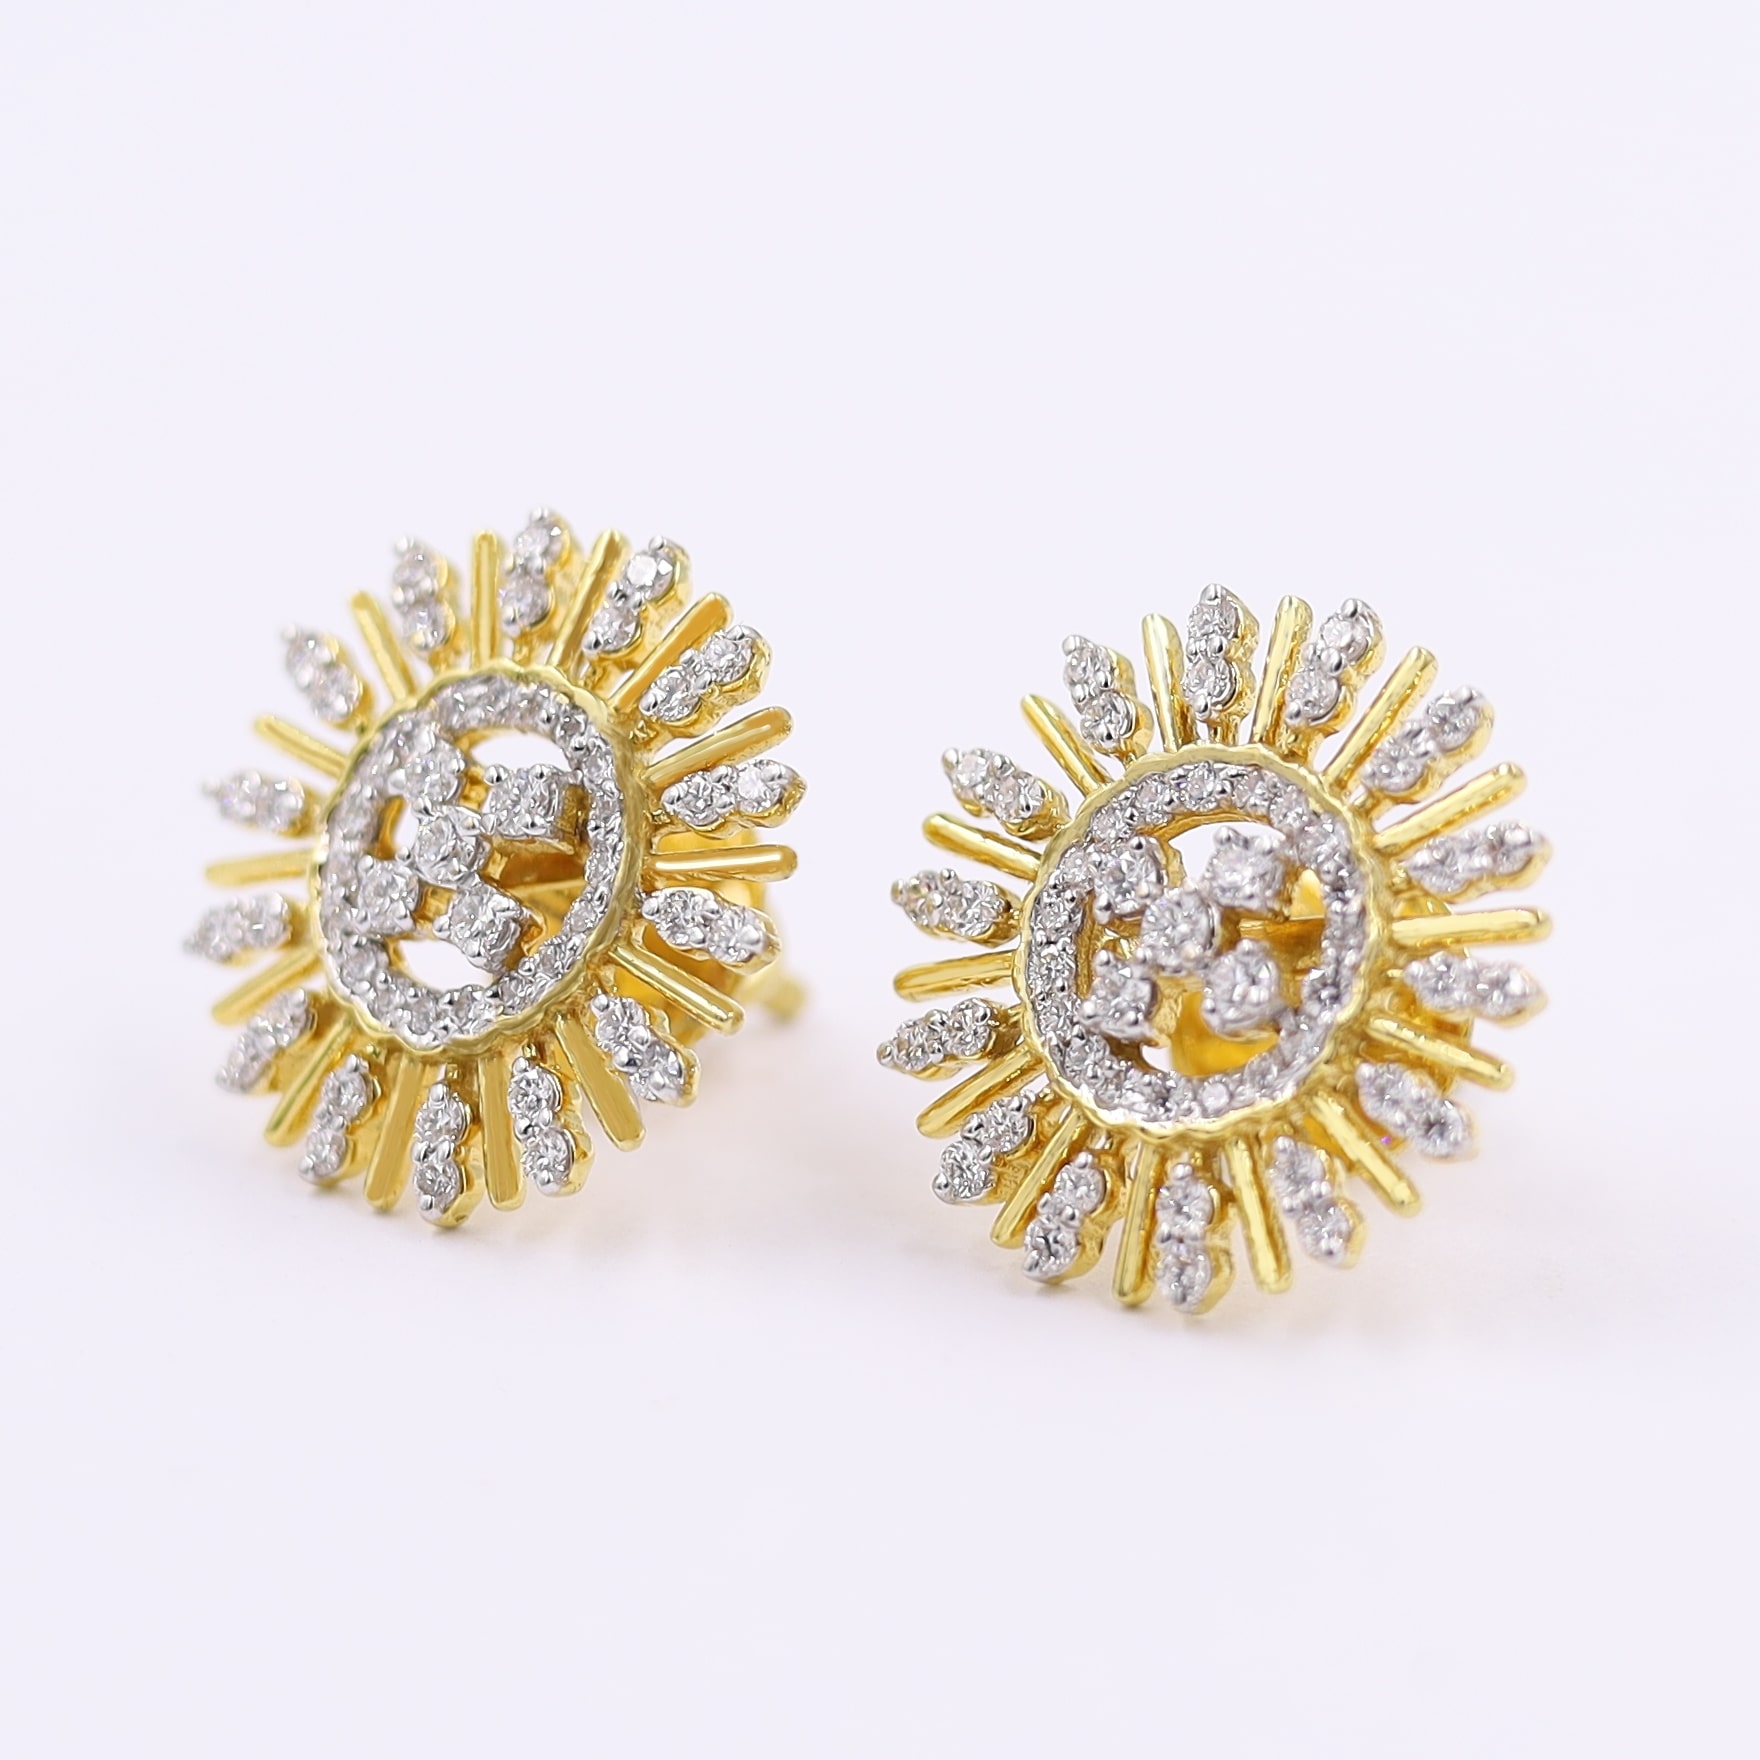 Traditional Diamond Stud Earrings In 18KT Yellow And White Gold